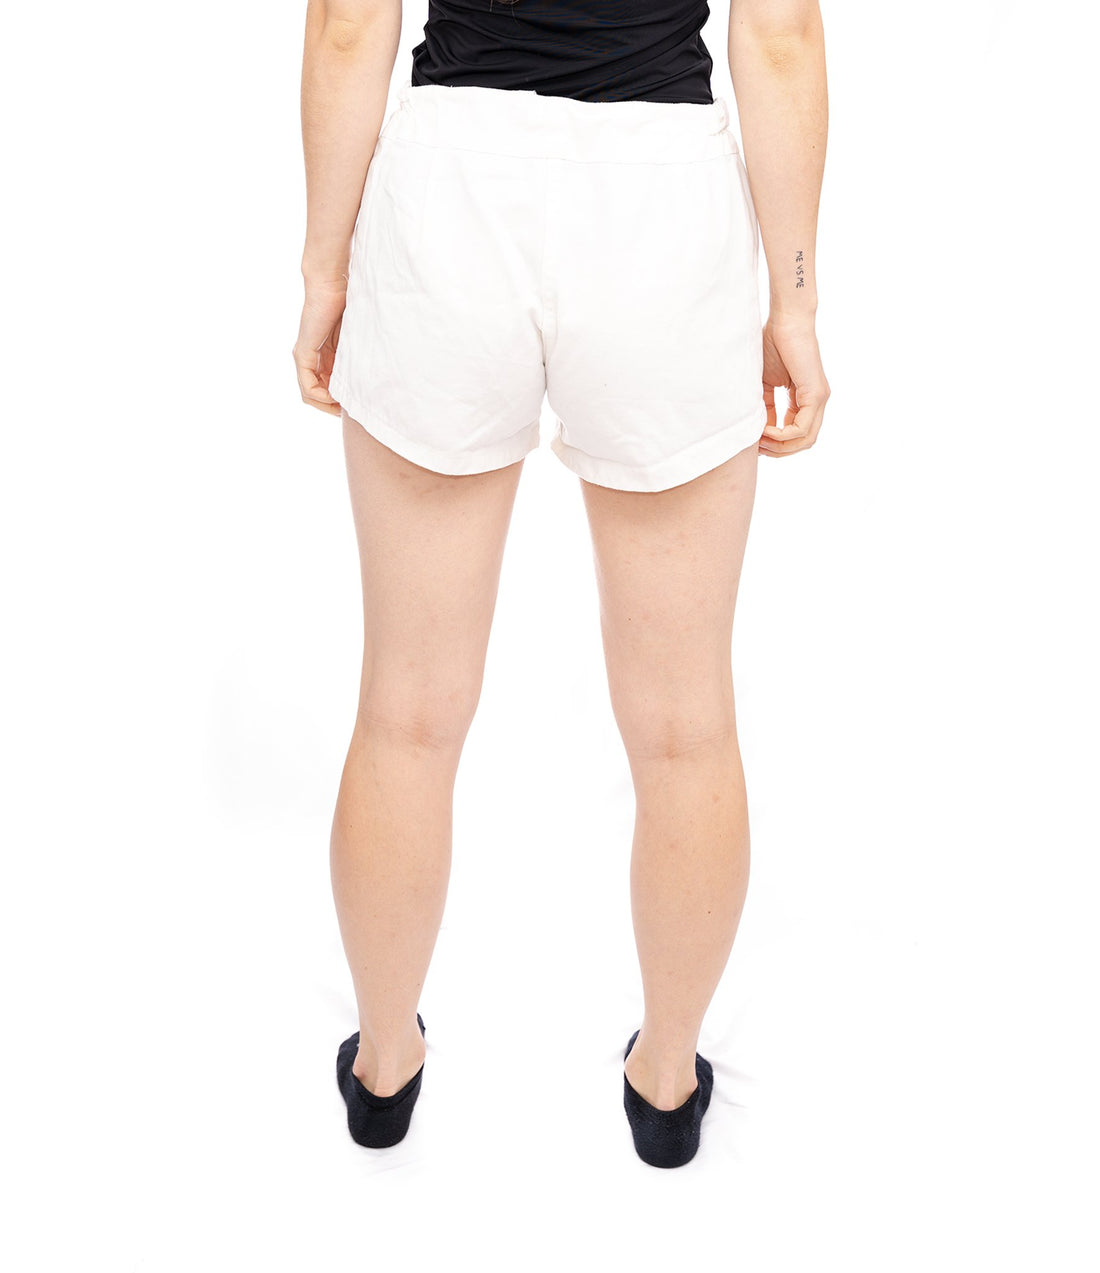 Barbarian rugby wear, white shorts with string waist